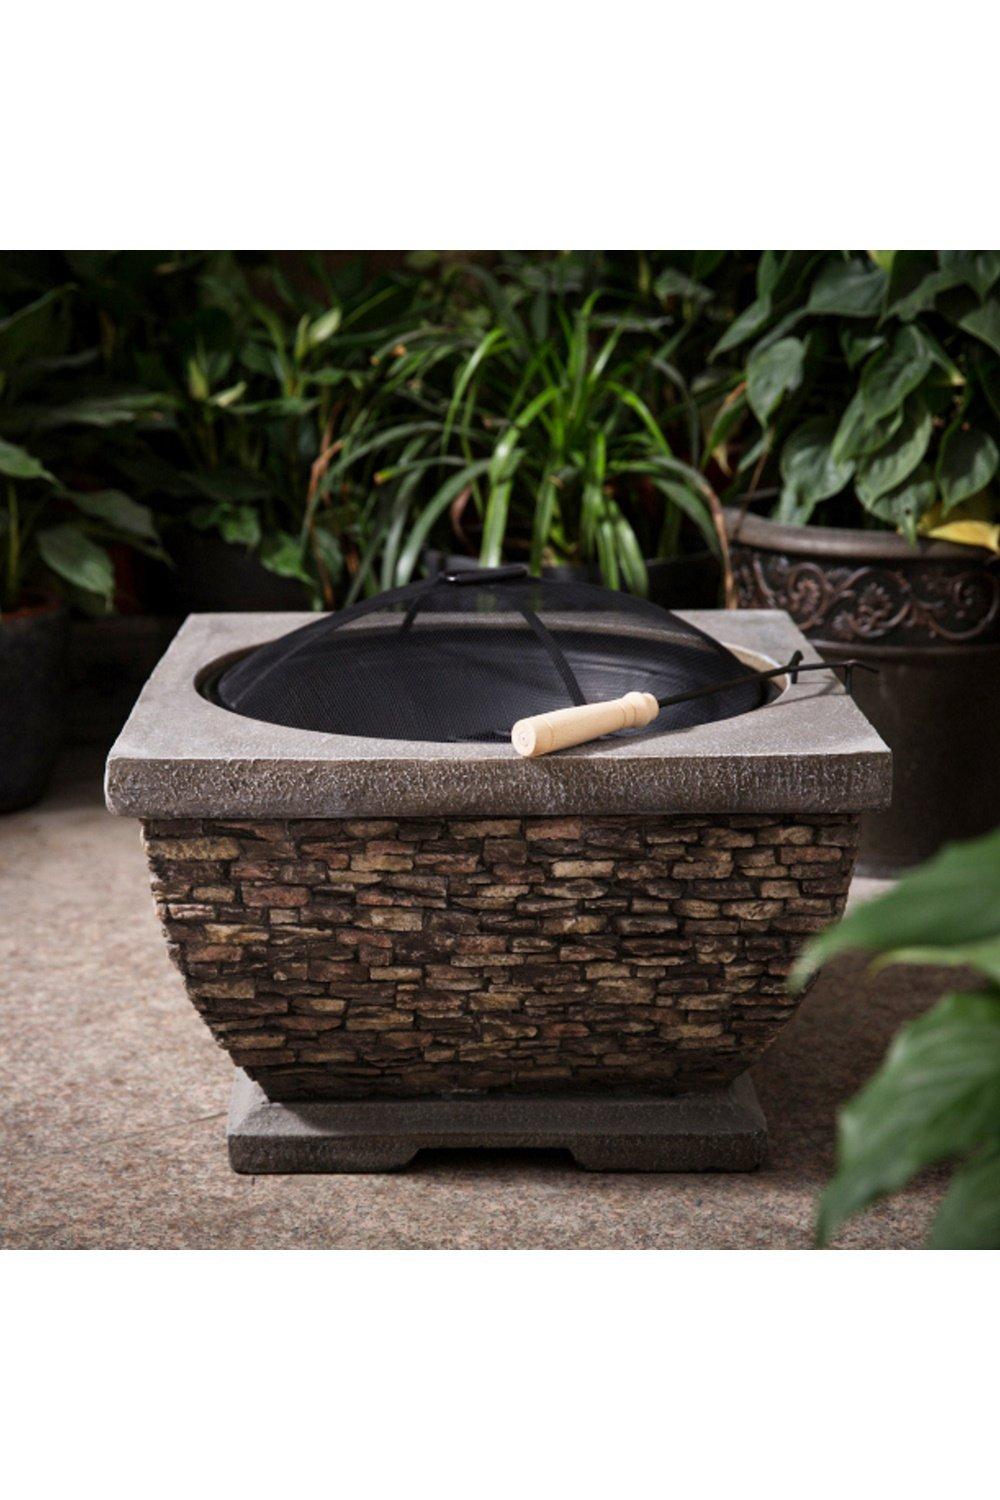 Premium Wood Burning Stone Fire Pit and Patio Heater